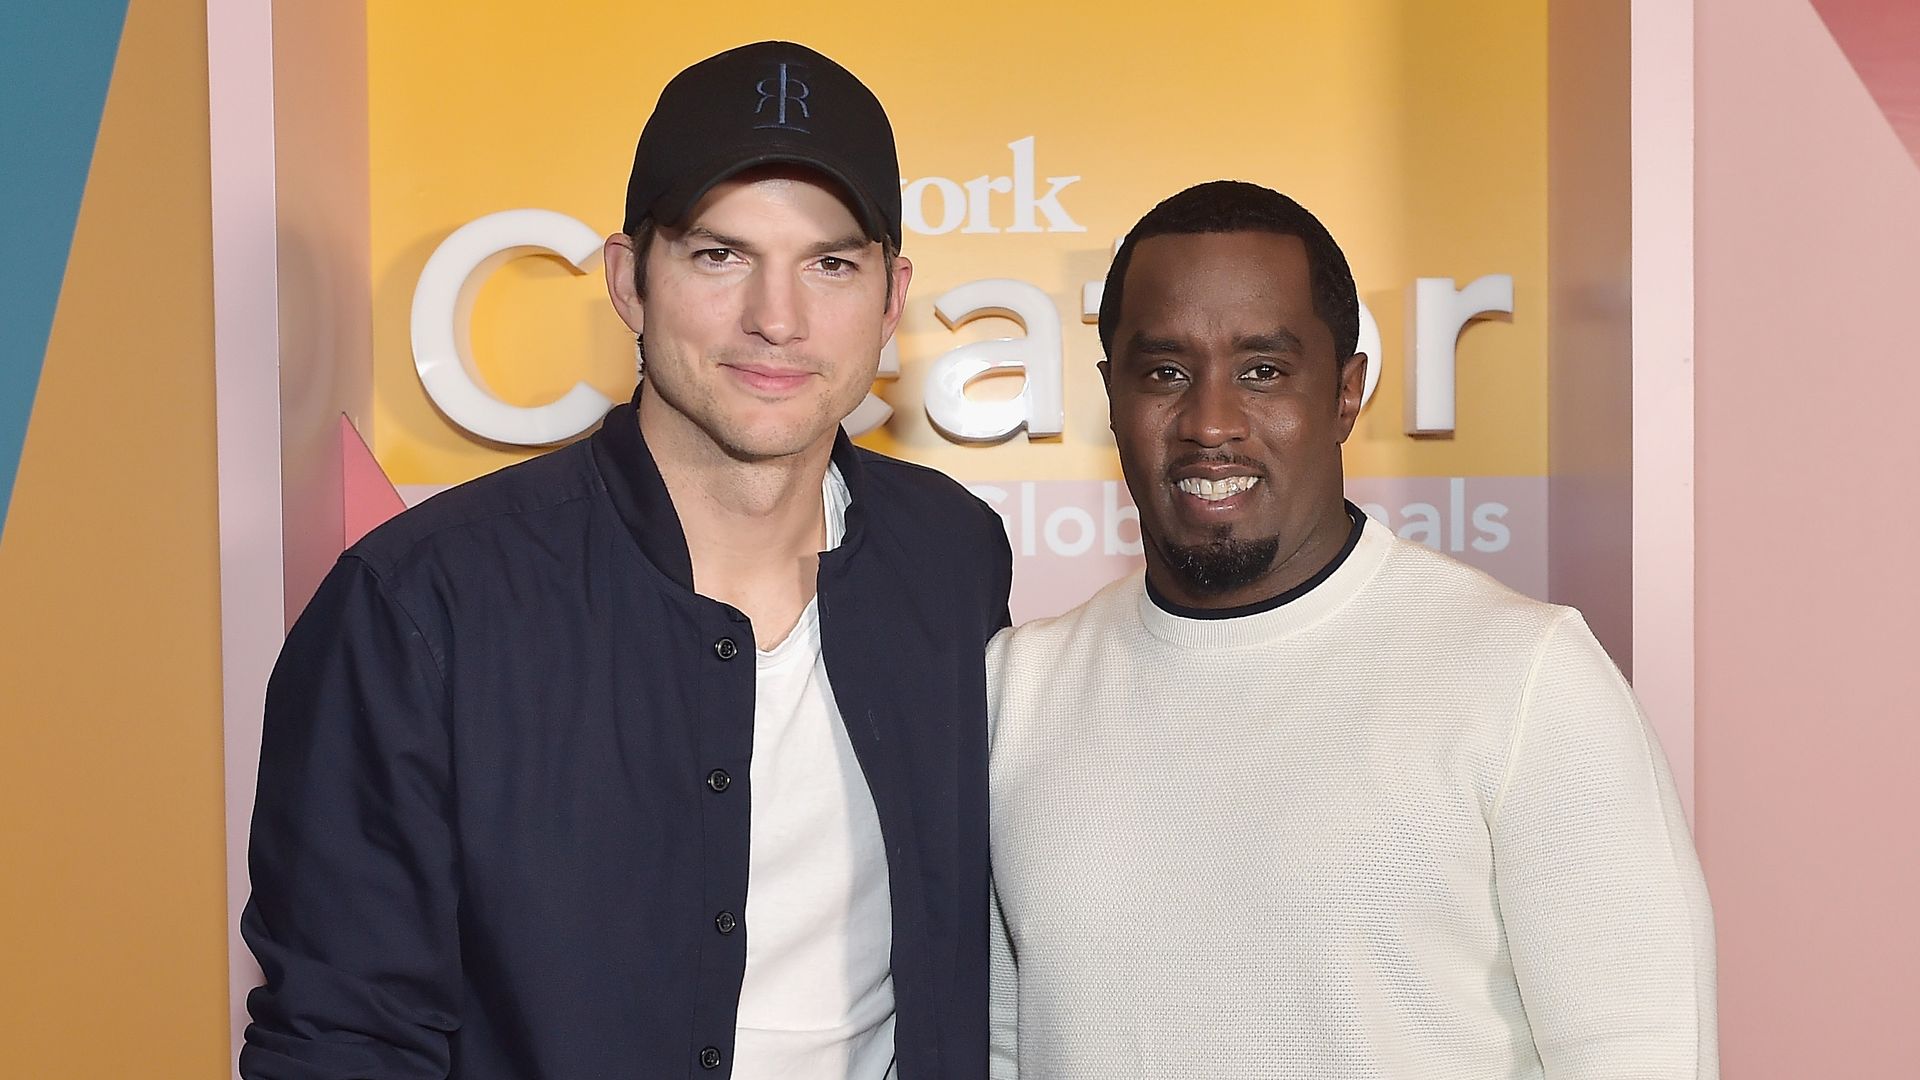 Ashton Kutcher and Sean Combs attend WeWork Presents Second Annual Creator Global Finals at Microsoft Theater on January 9, 2019 in Los Angeles, California